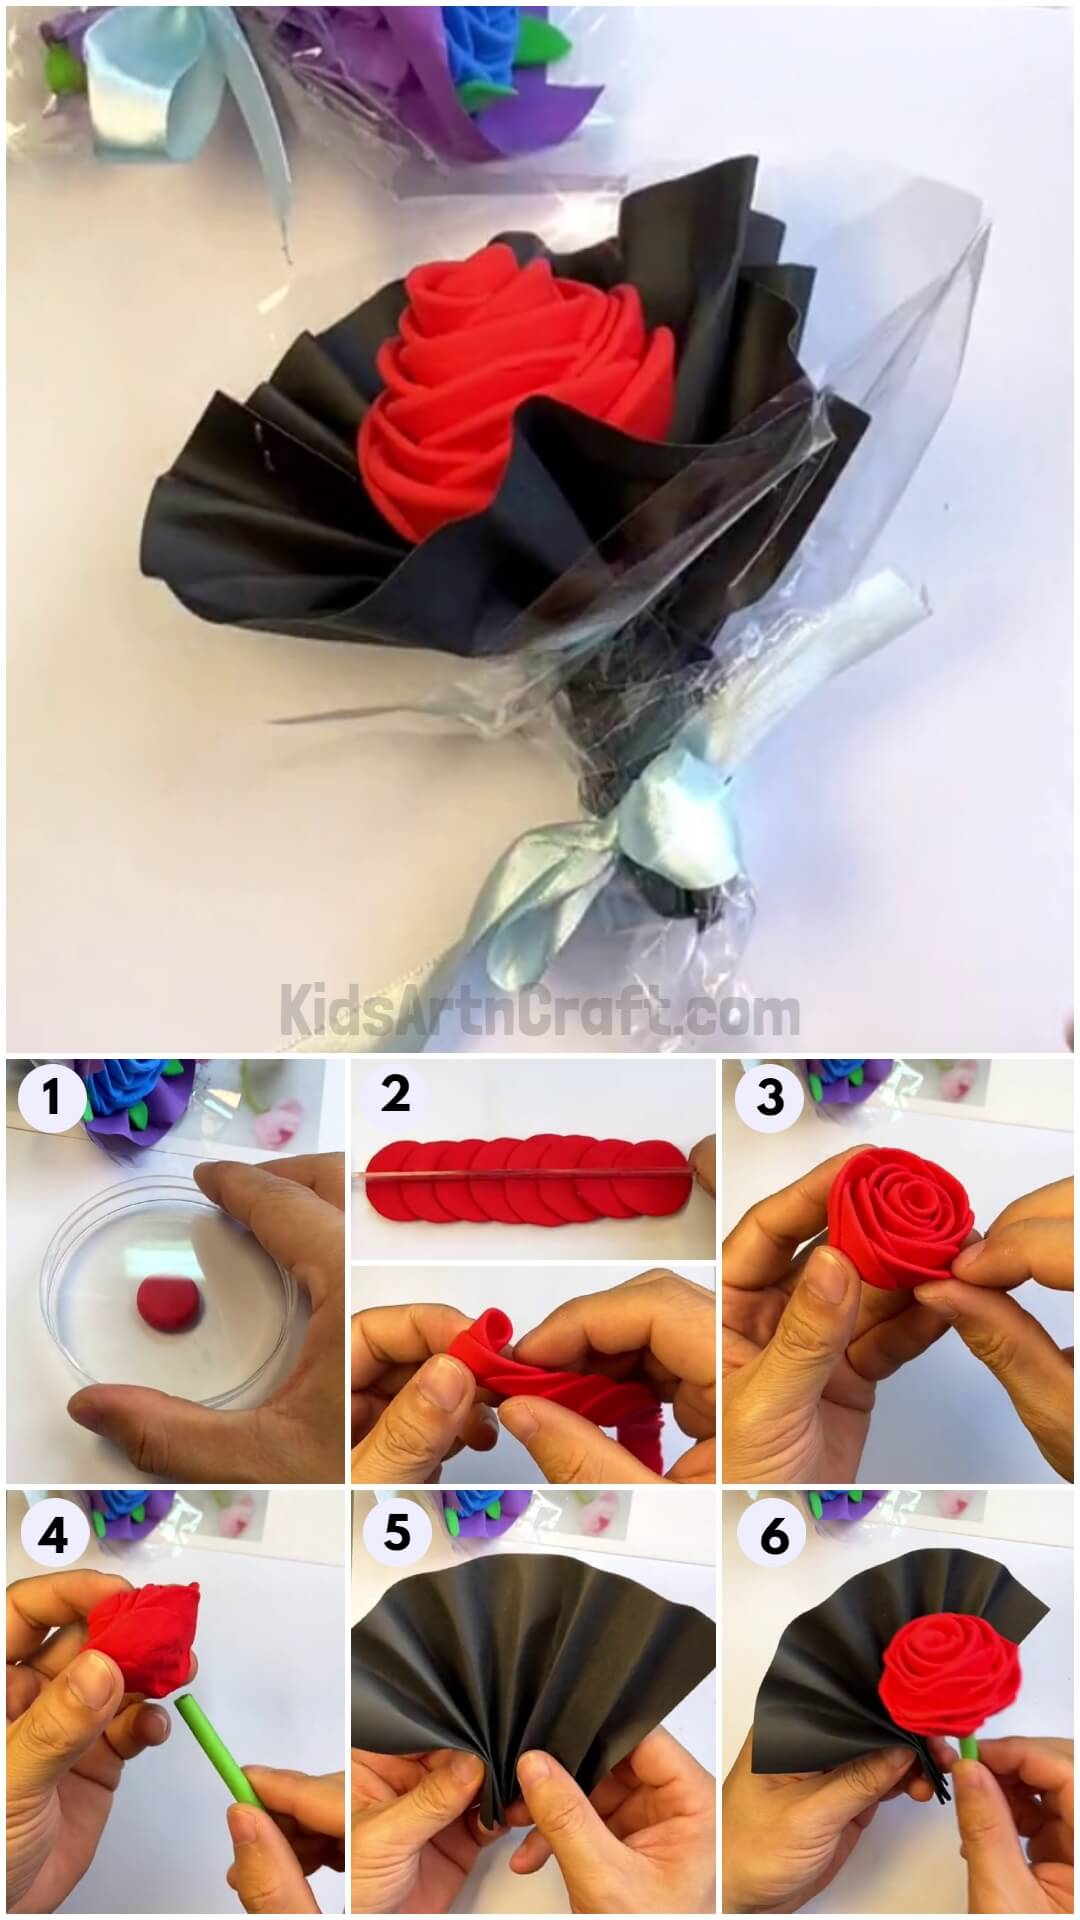 Easy to make Clay Rose Bouquet Craft For Kids